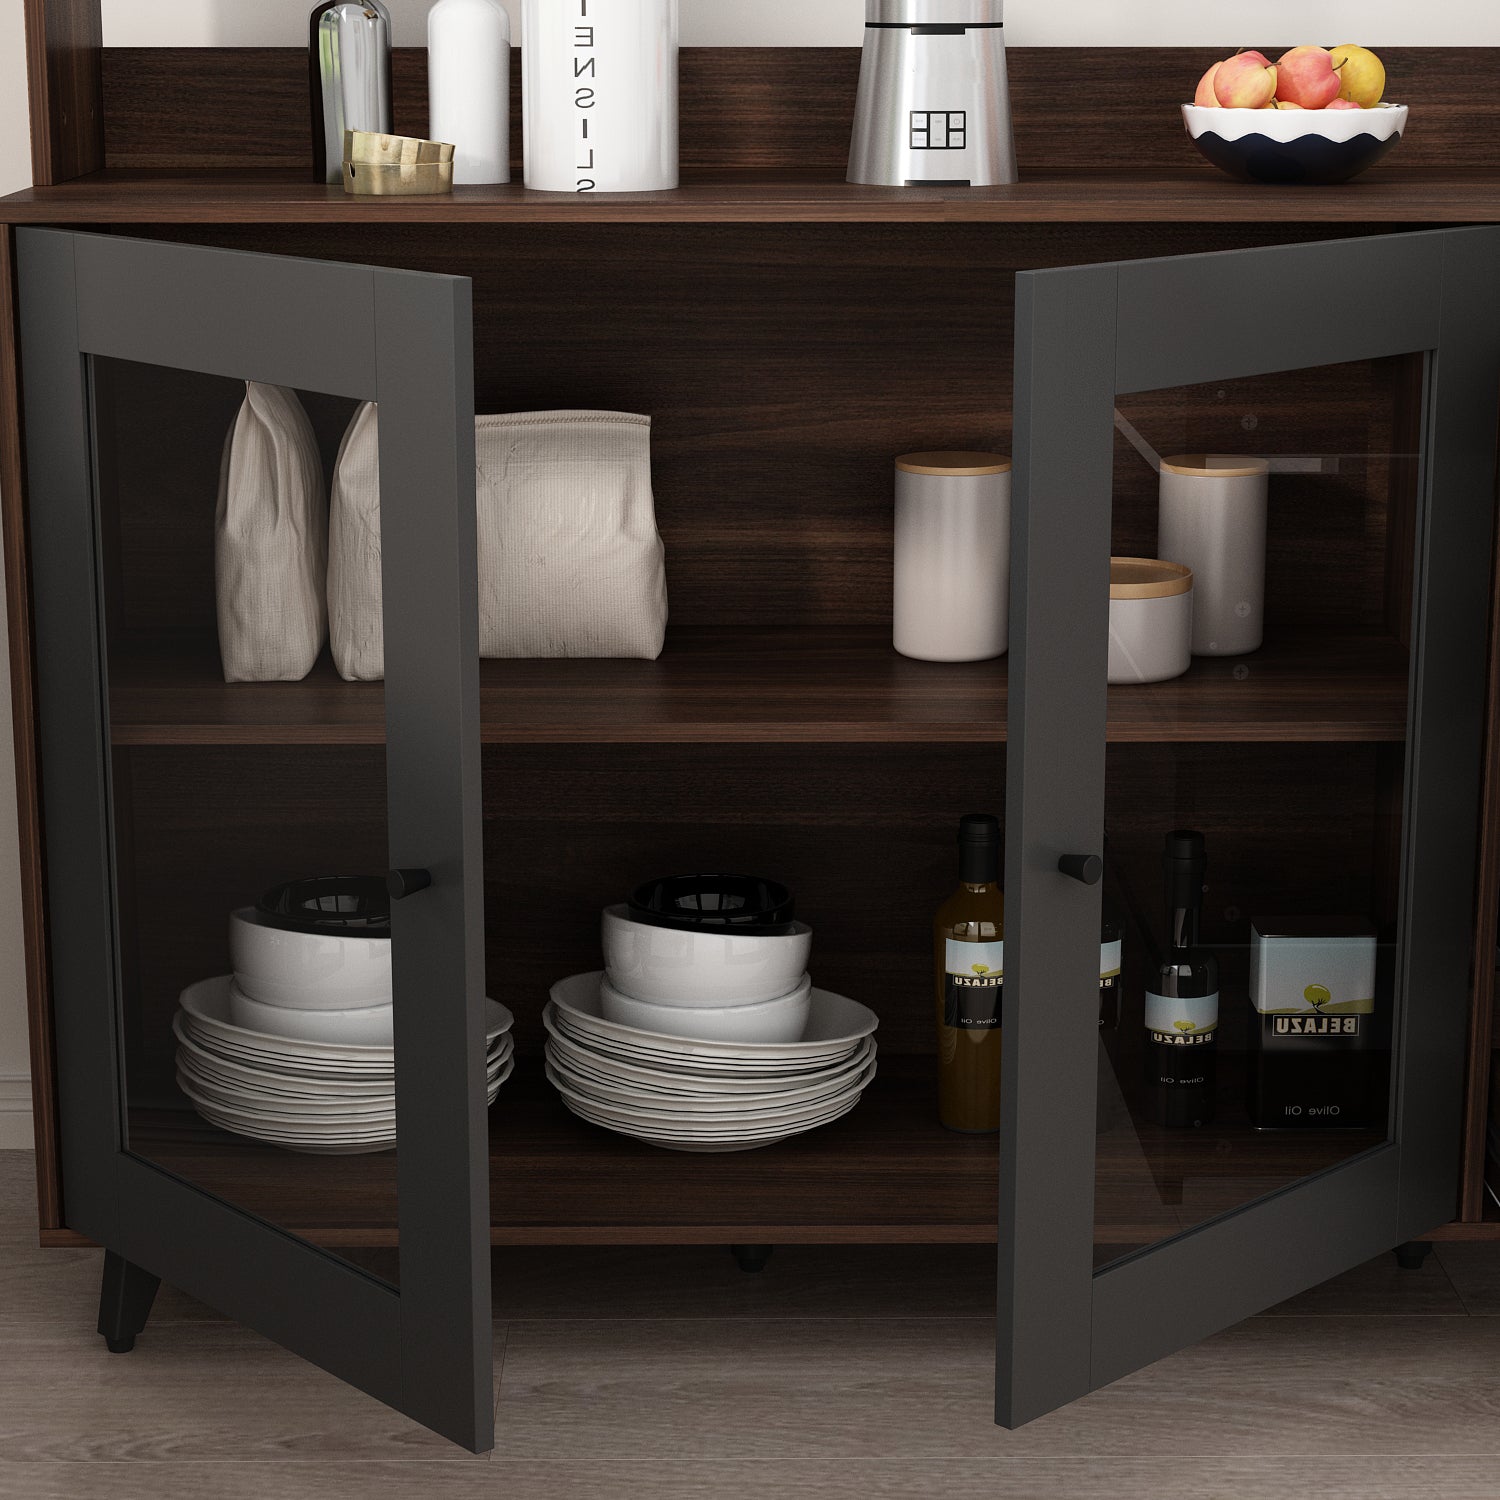 FOTOSOK Kitchen Pantry Storage Cabinet, 63'' Tall Pantry Cabinet with Glass  Doors and Adjustable Shelves, Kitchen Cabinet Cupboard with Microwave